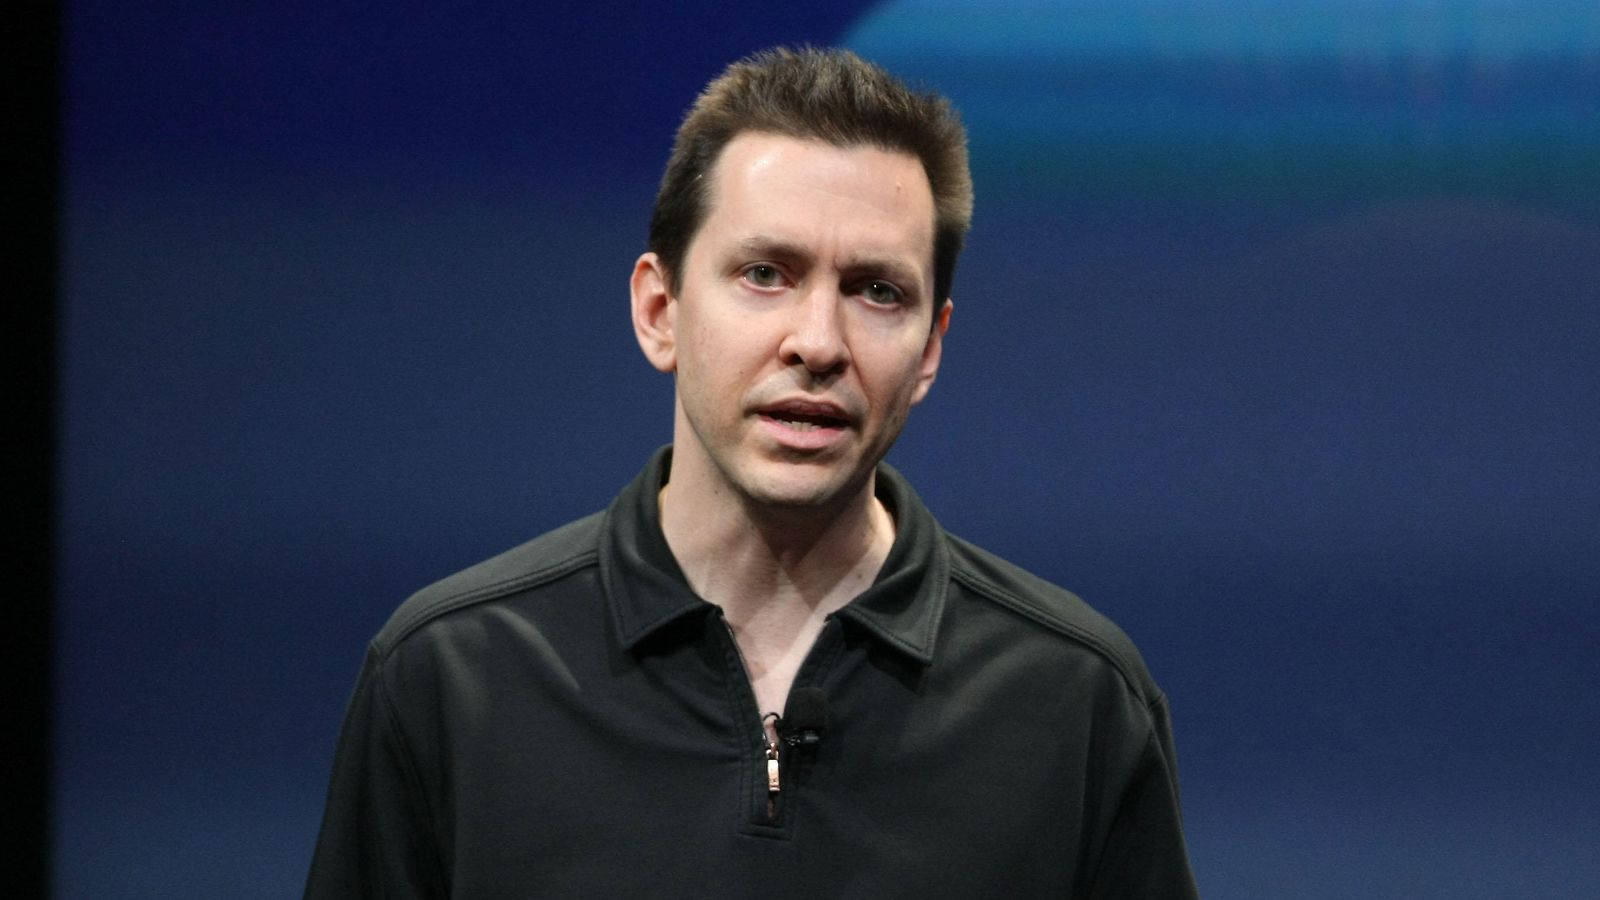 Scott Forstall And His Vision In A Presentation Background